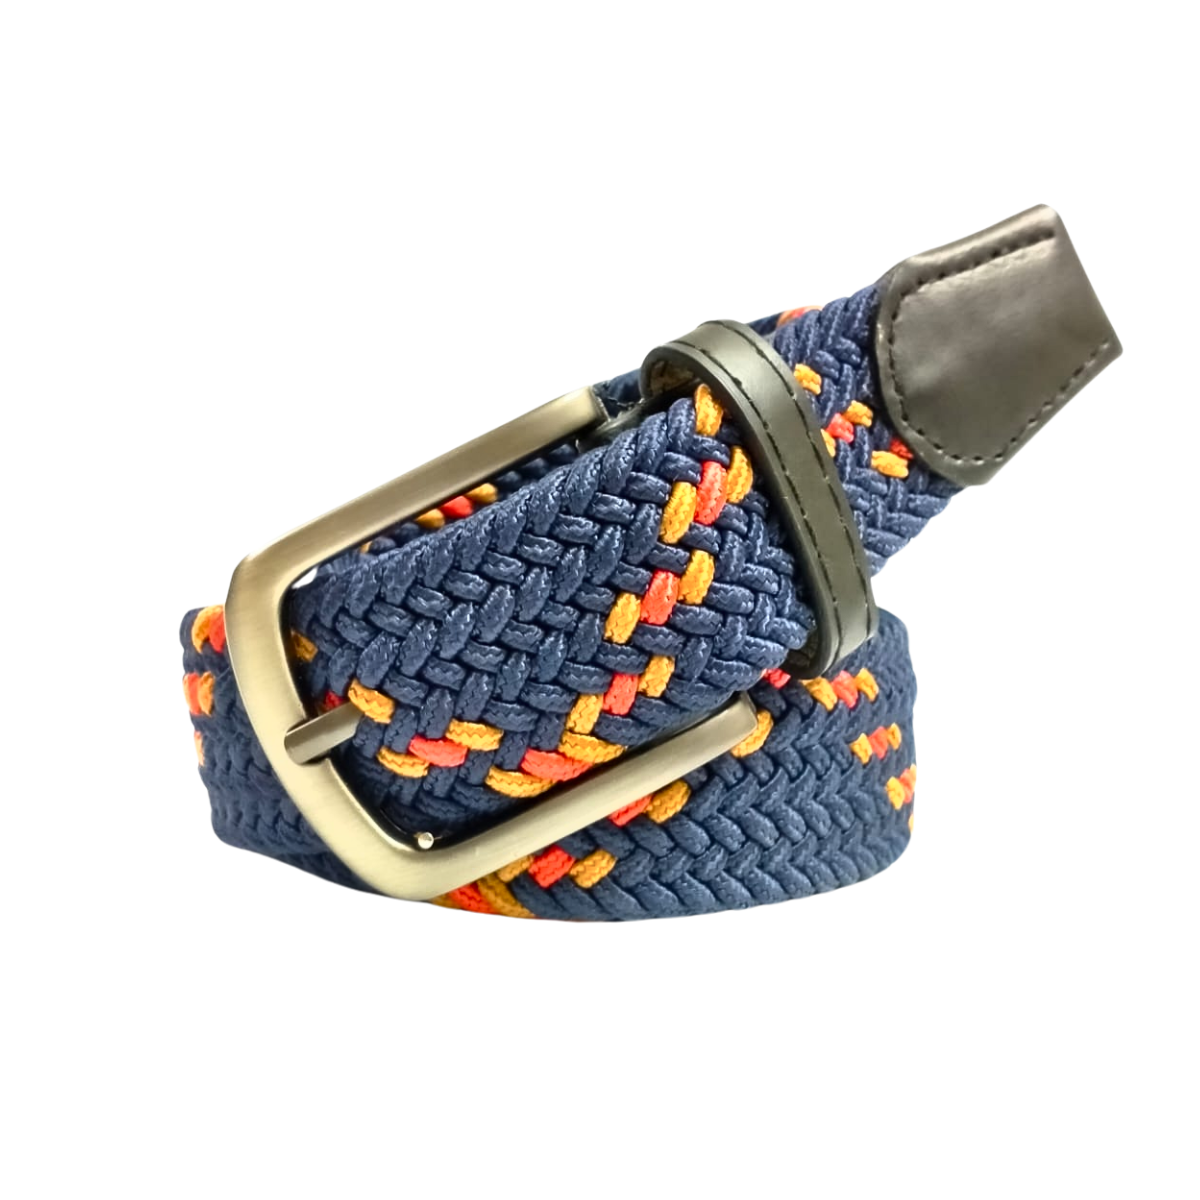 GolfBasic Premium Quality Braided Multi Color Belts